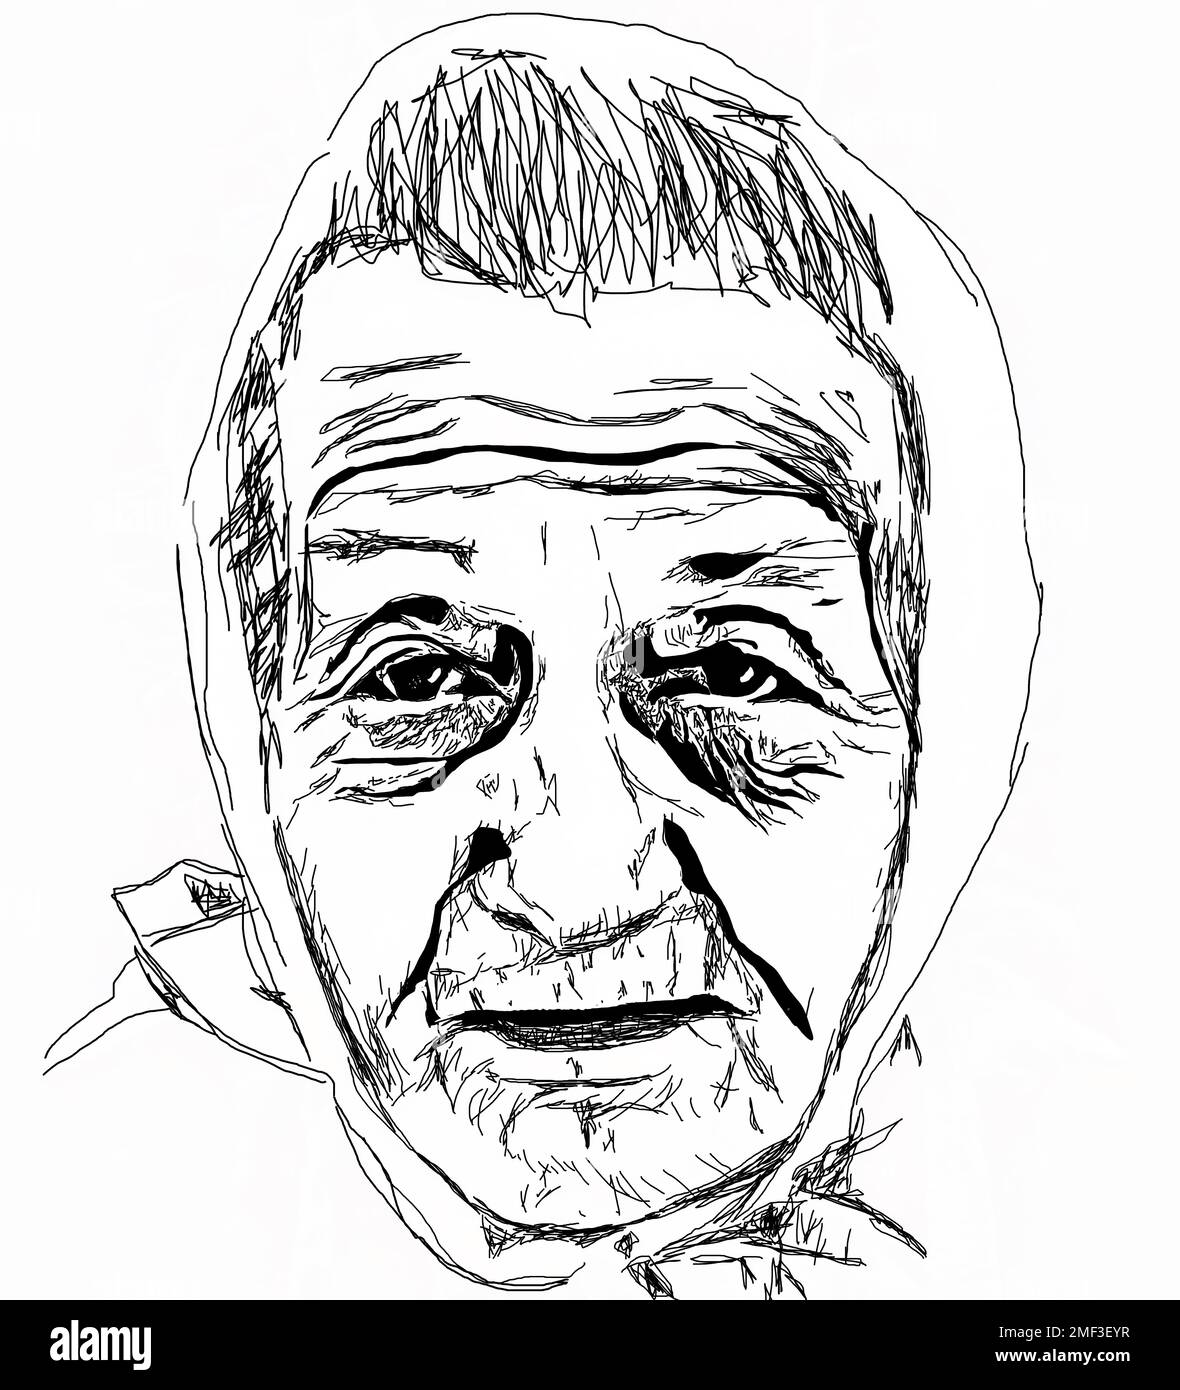 An elderly old woman in a head scarf was drawn in an informal portrait sketch made digitally. Stock Photo